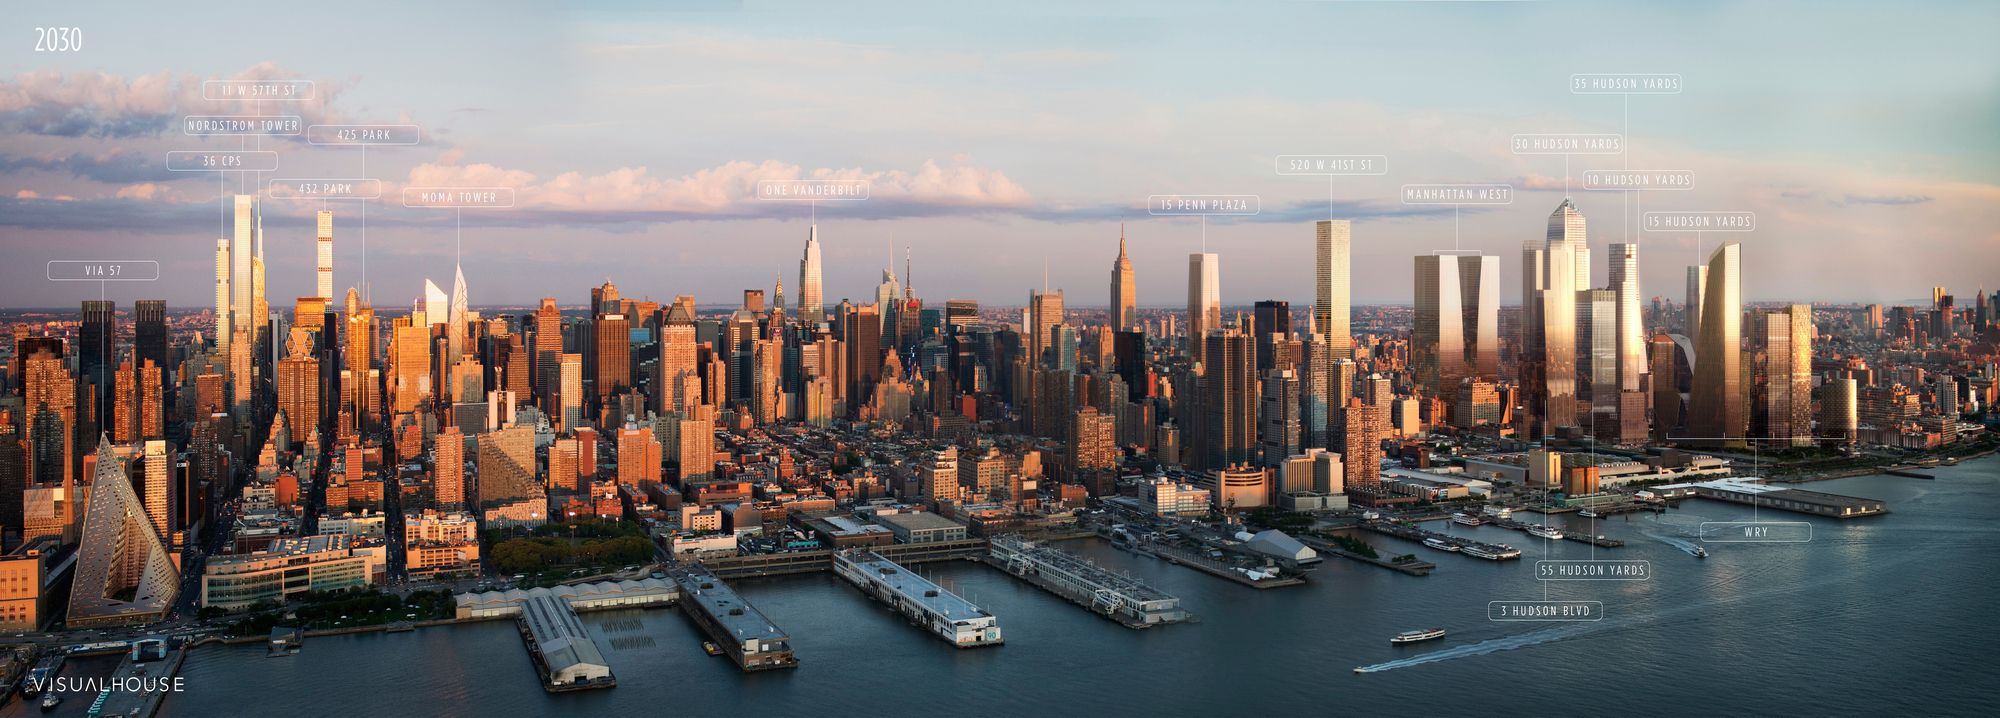 New York Skyline - What Will New York City Look Like In The Future